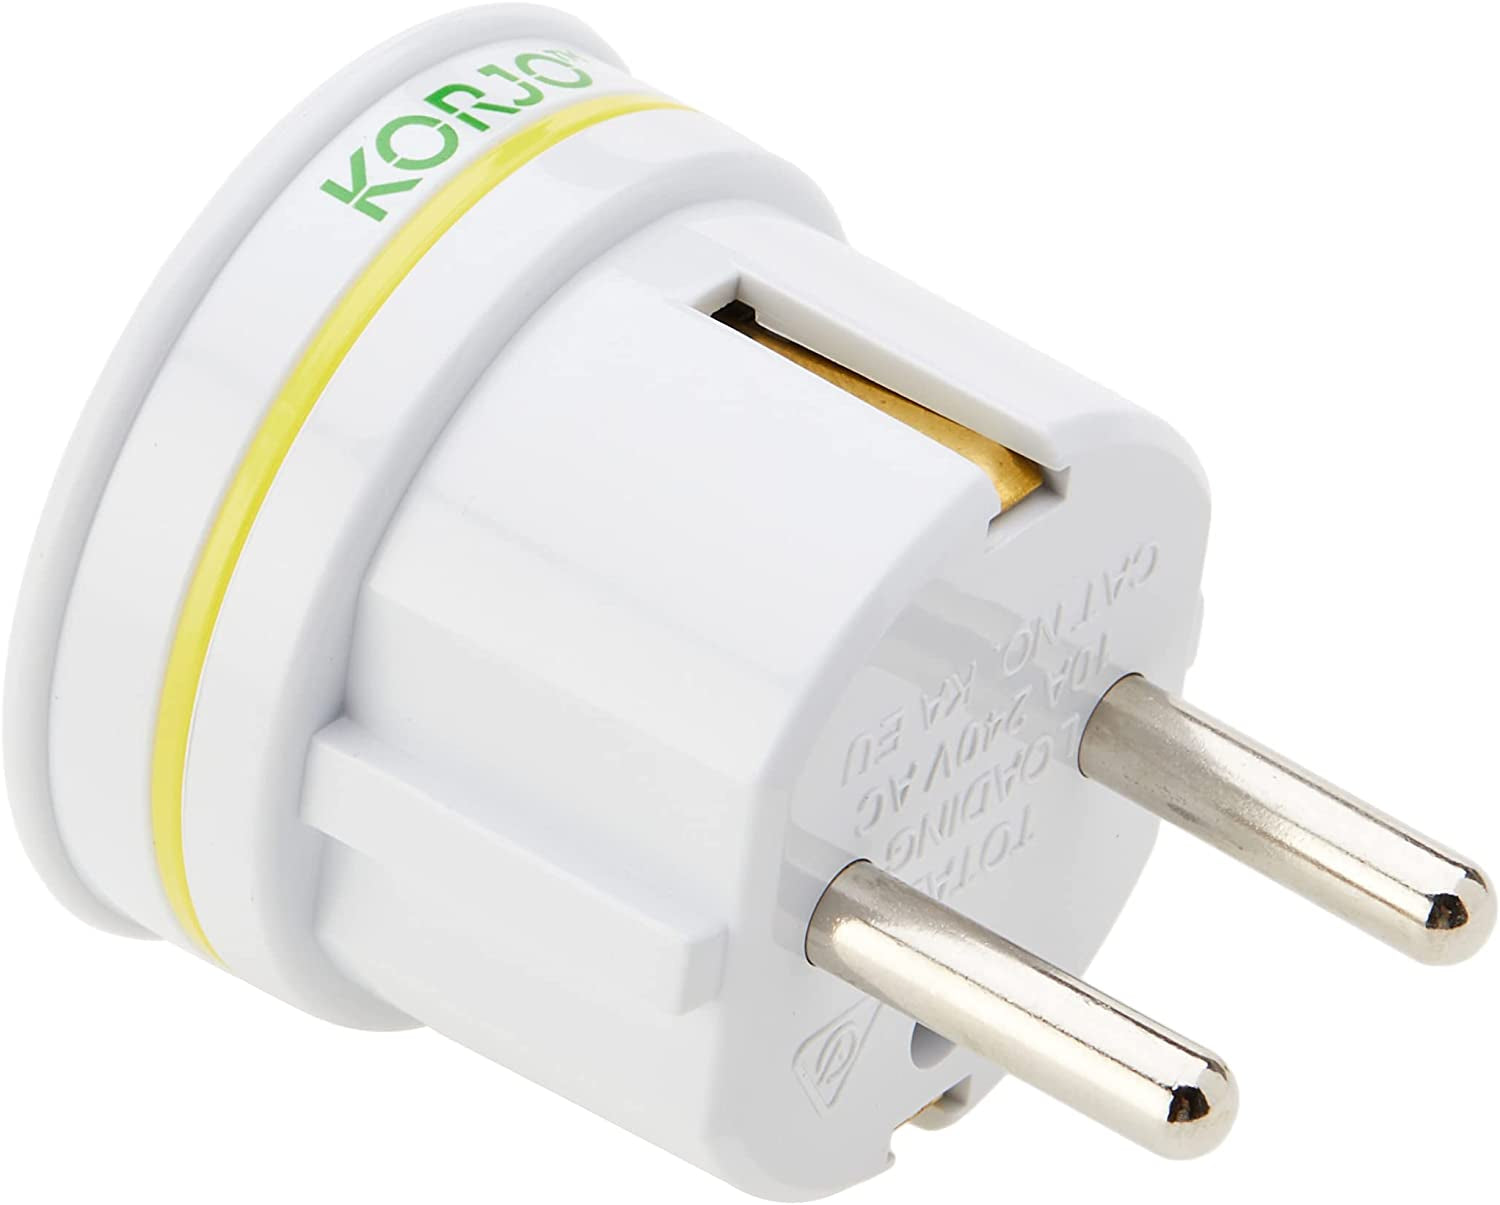 KORJO, Korjo EU Travel Adaptor, for AU/NZ Appliances, Use in Europe (Except UK), Bali and Parts of the Asia, Middle East, & Sth America. Excluding: UK, Italy, Switzerland, Chile, Brazil.